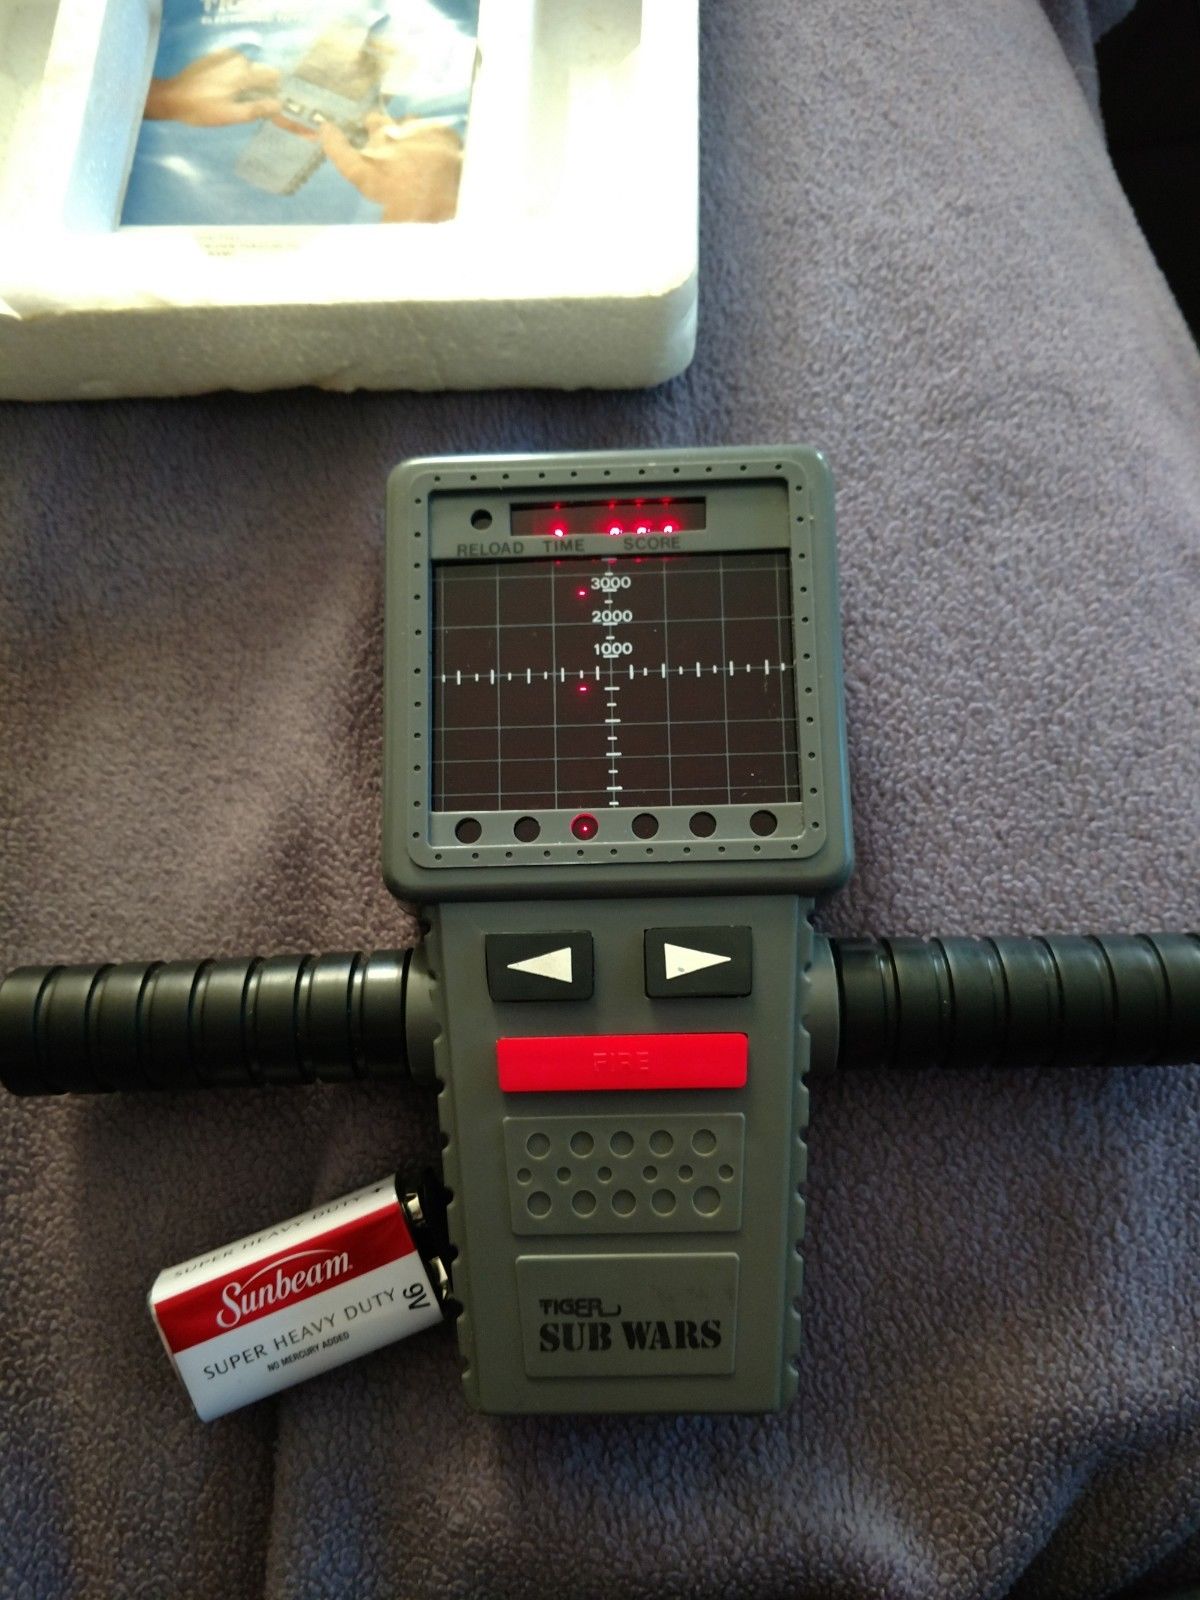 Game used for Snake's tracker device